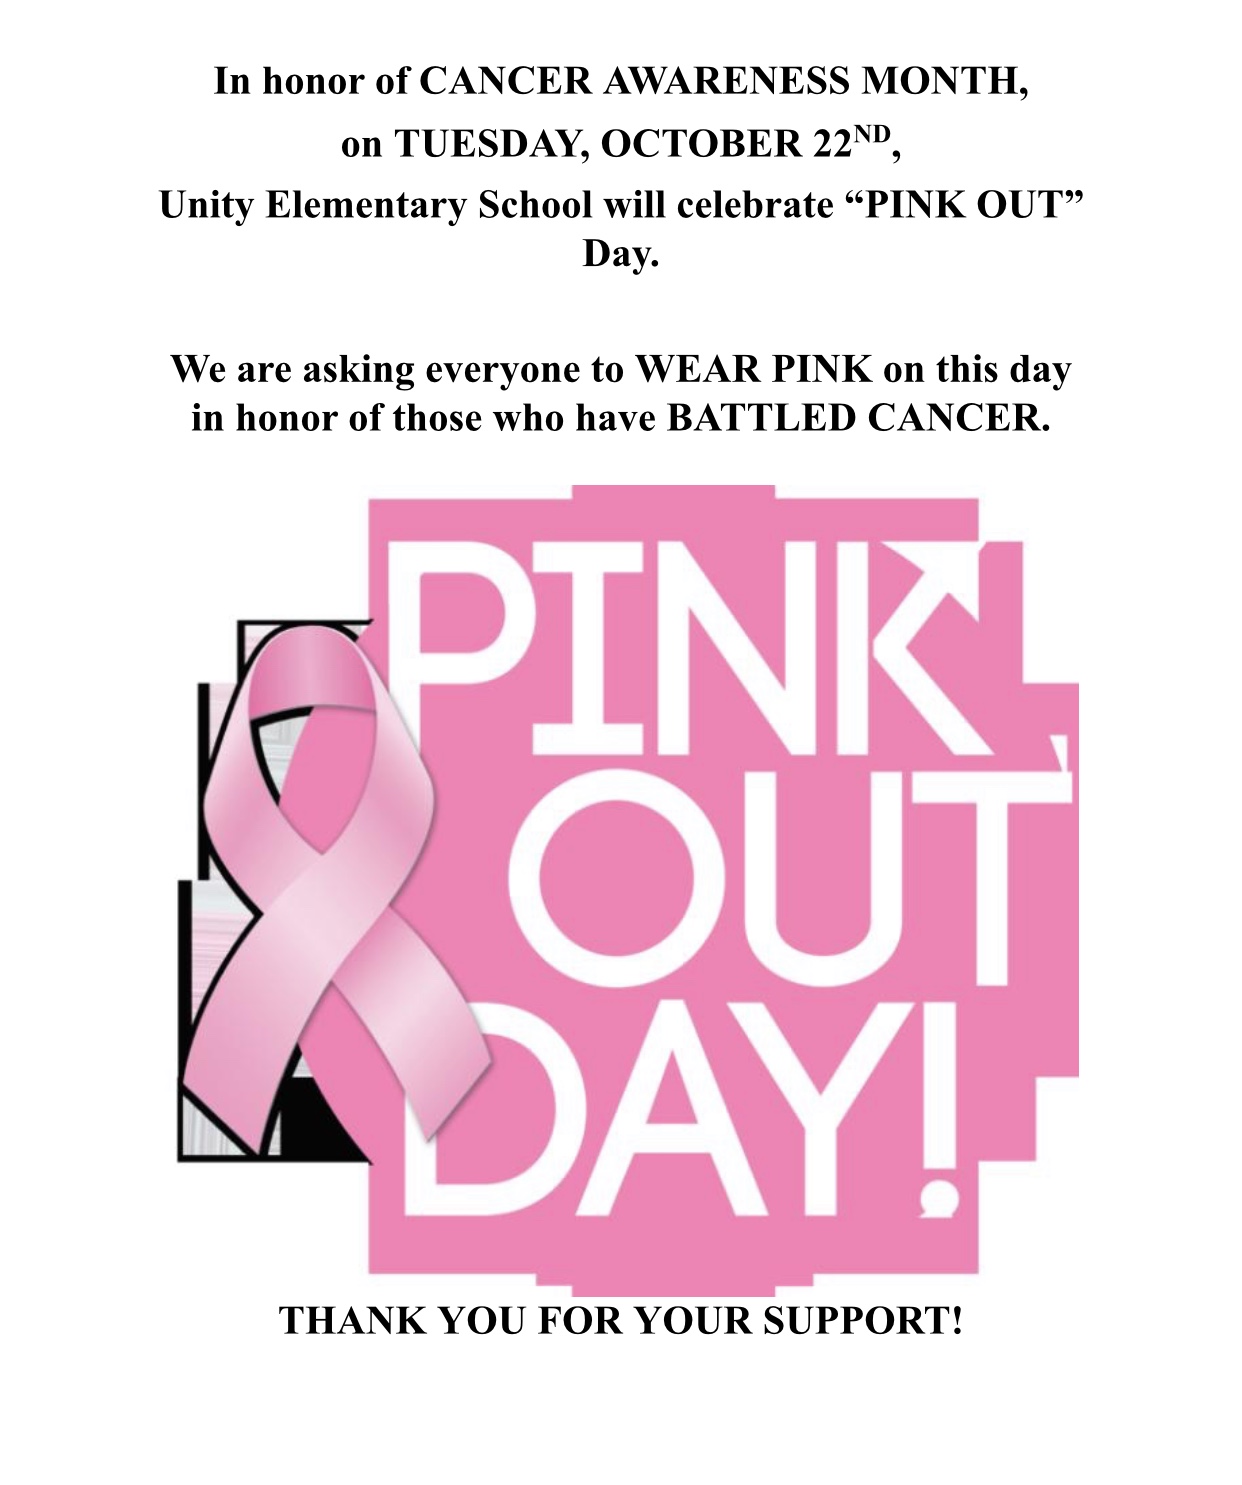 Save the Date for Pink Out Day! Unity Elementary